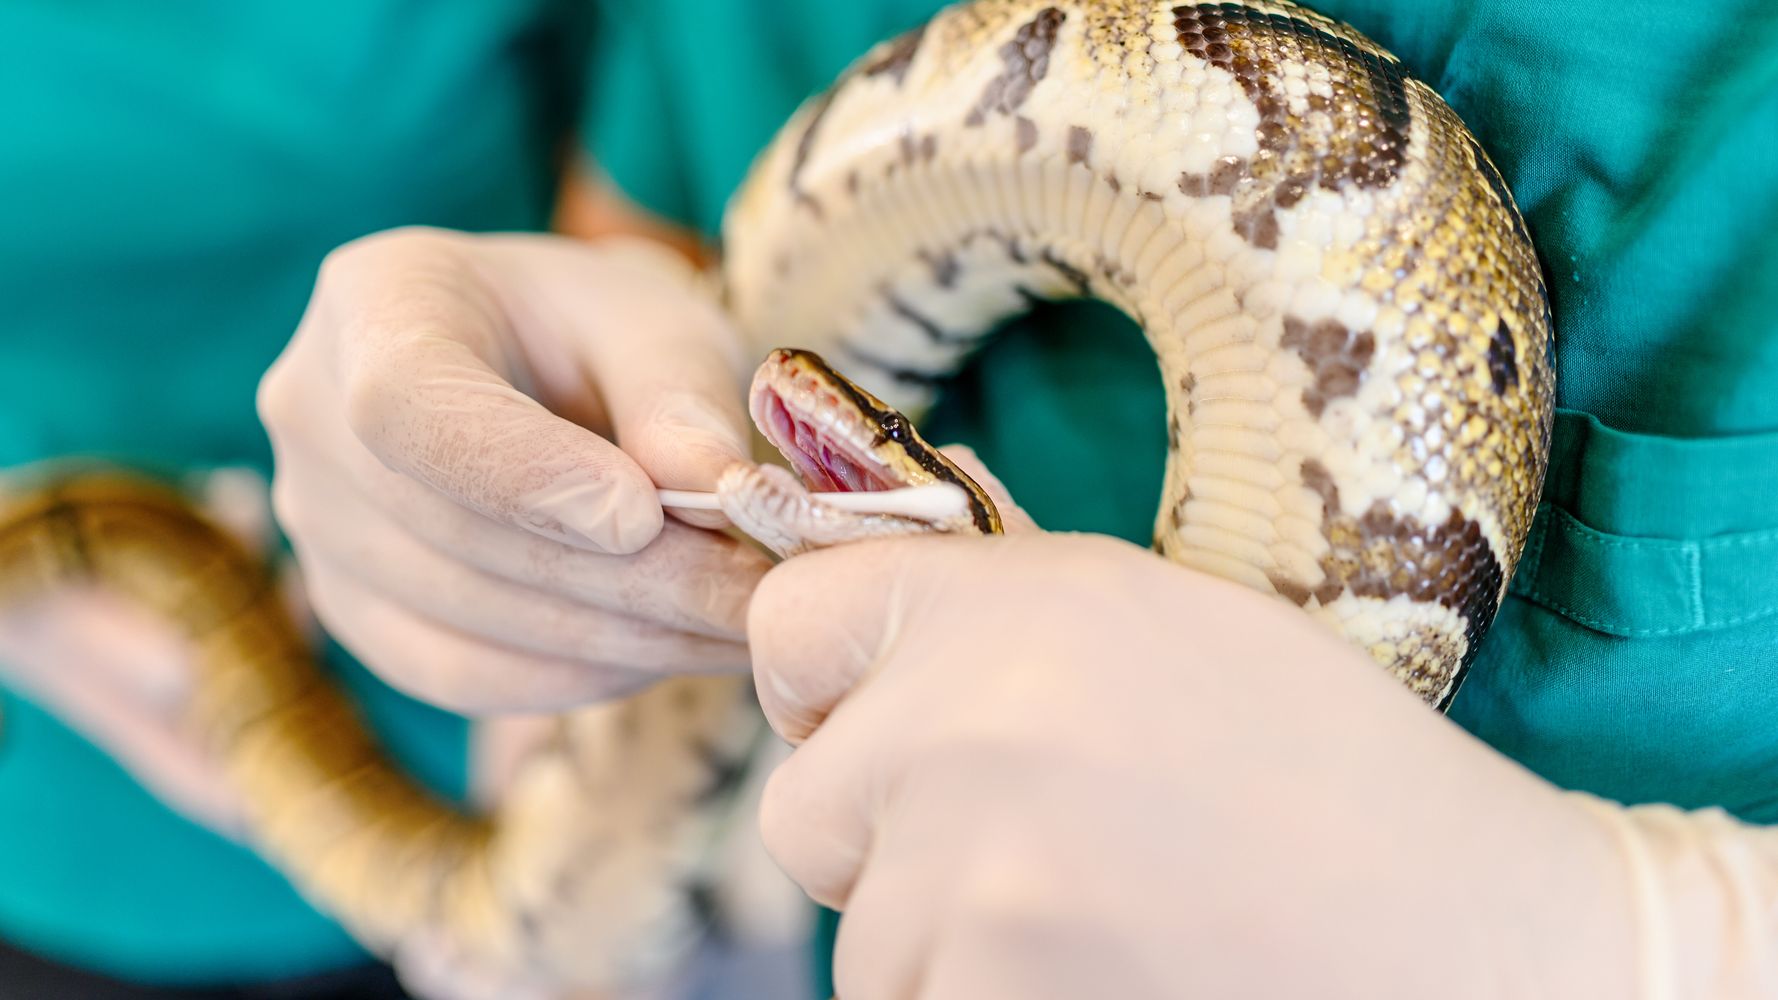 Police Shoot 15-Foot Pet Snake Wrapped Around Owner’s Neck